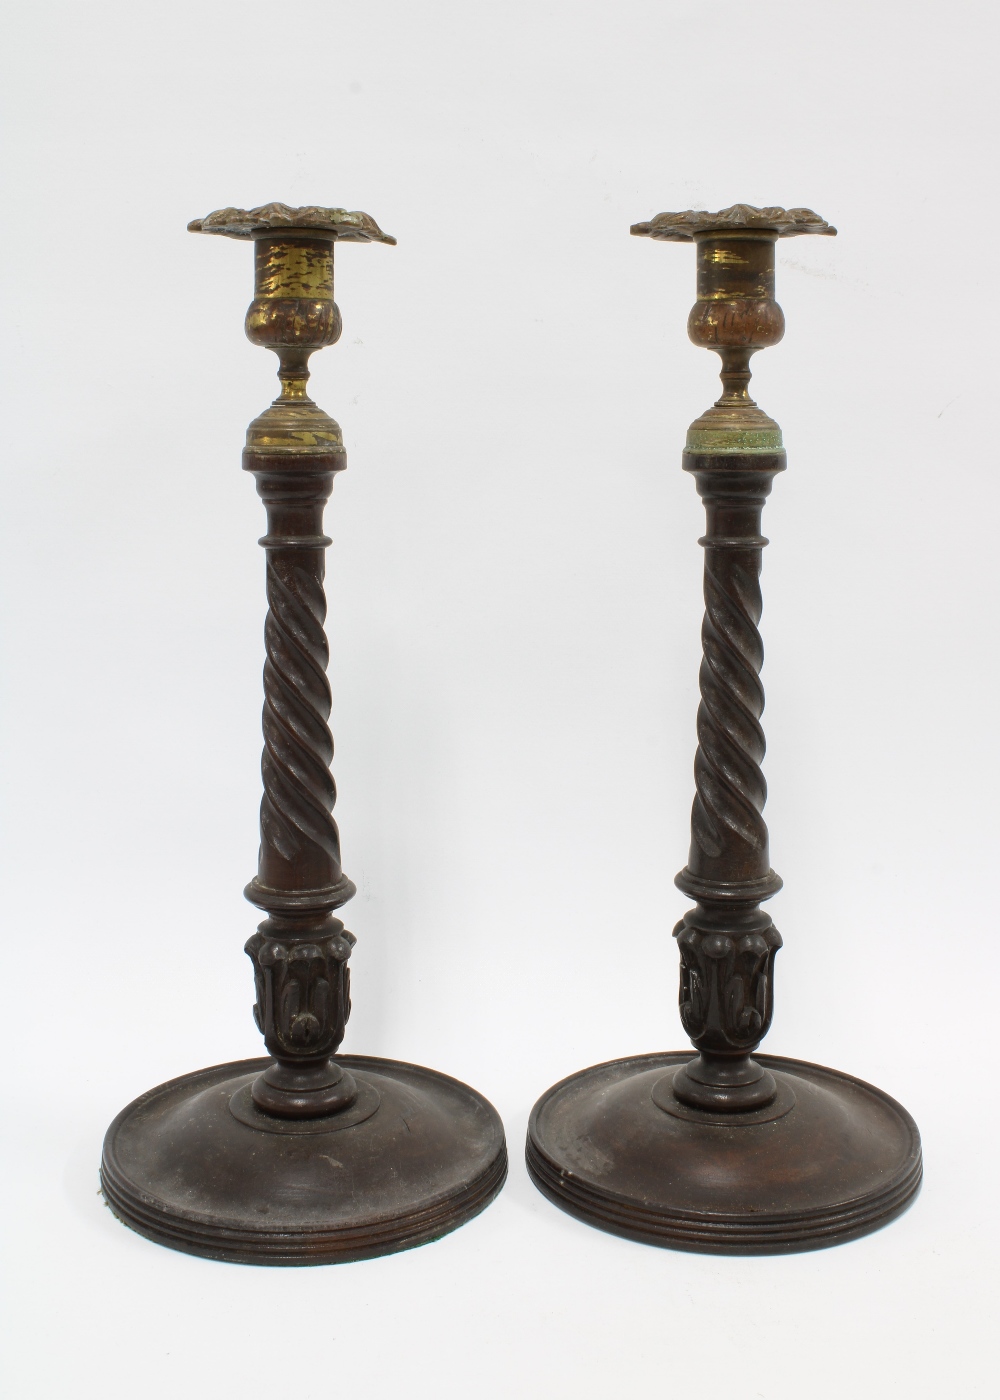 A pair of mahogany candlesticks with brass sconces, spiral stems and circular footrims, (2) 33cm.